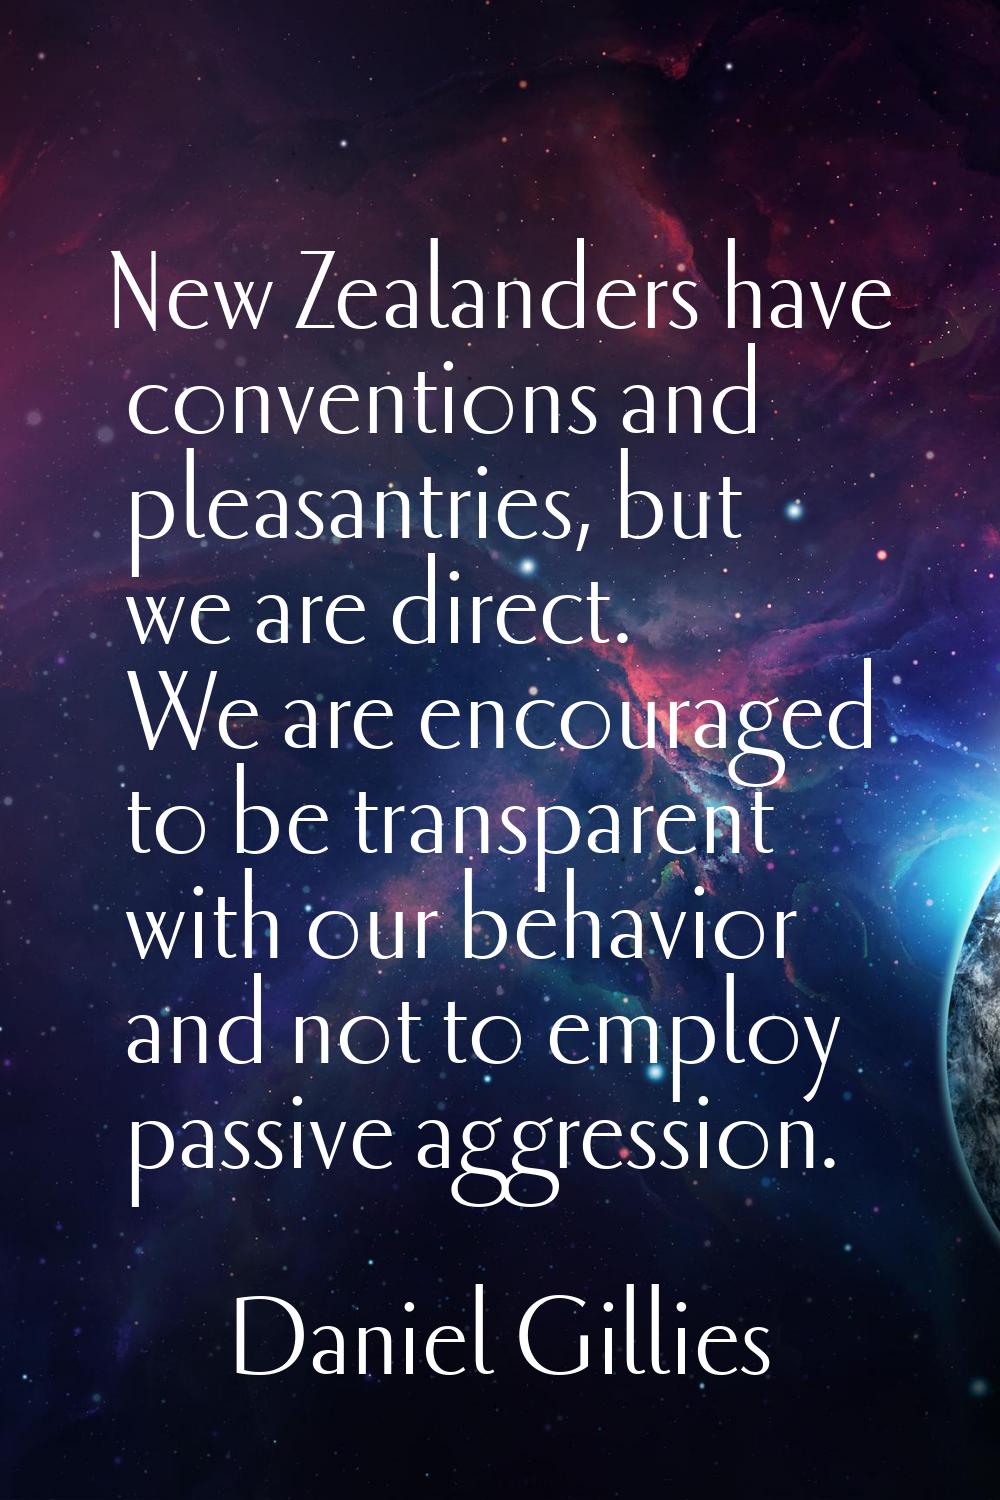 New Zealanders have conventions and pleasantries, but we are direct. We are encouraged to be transp